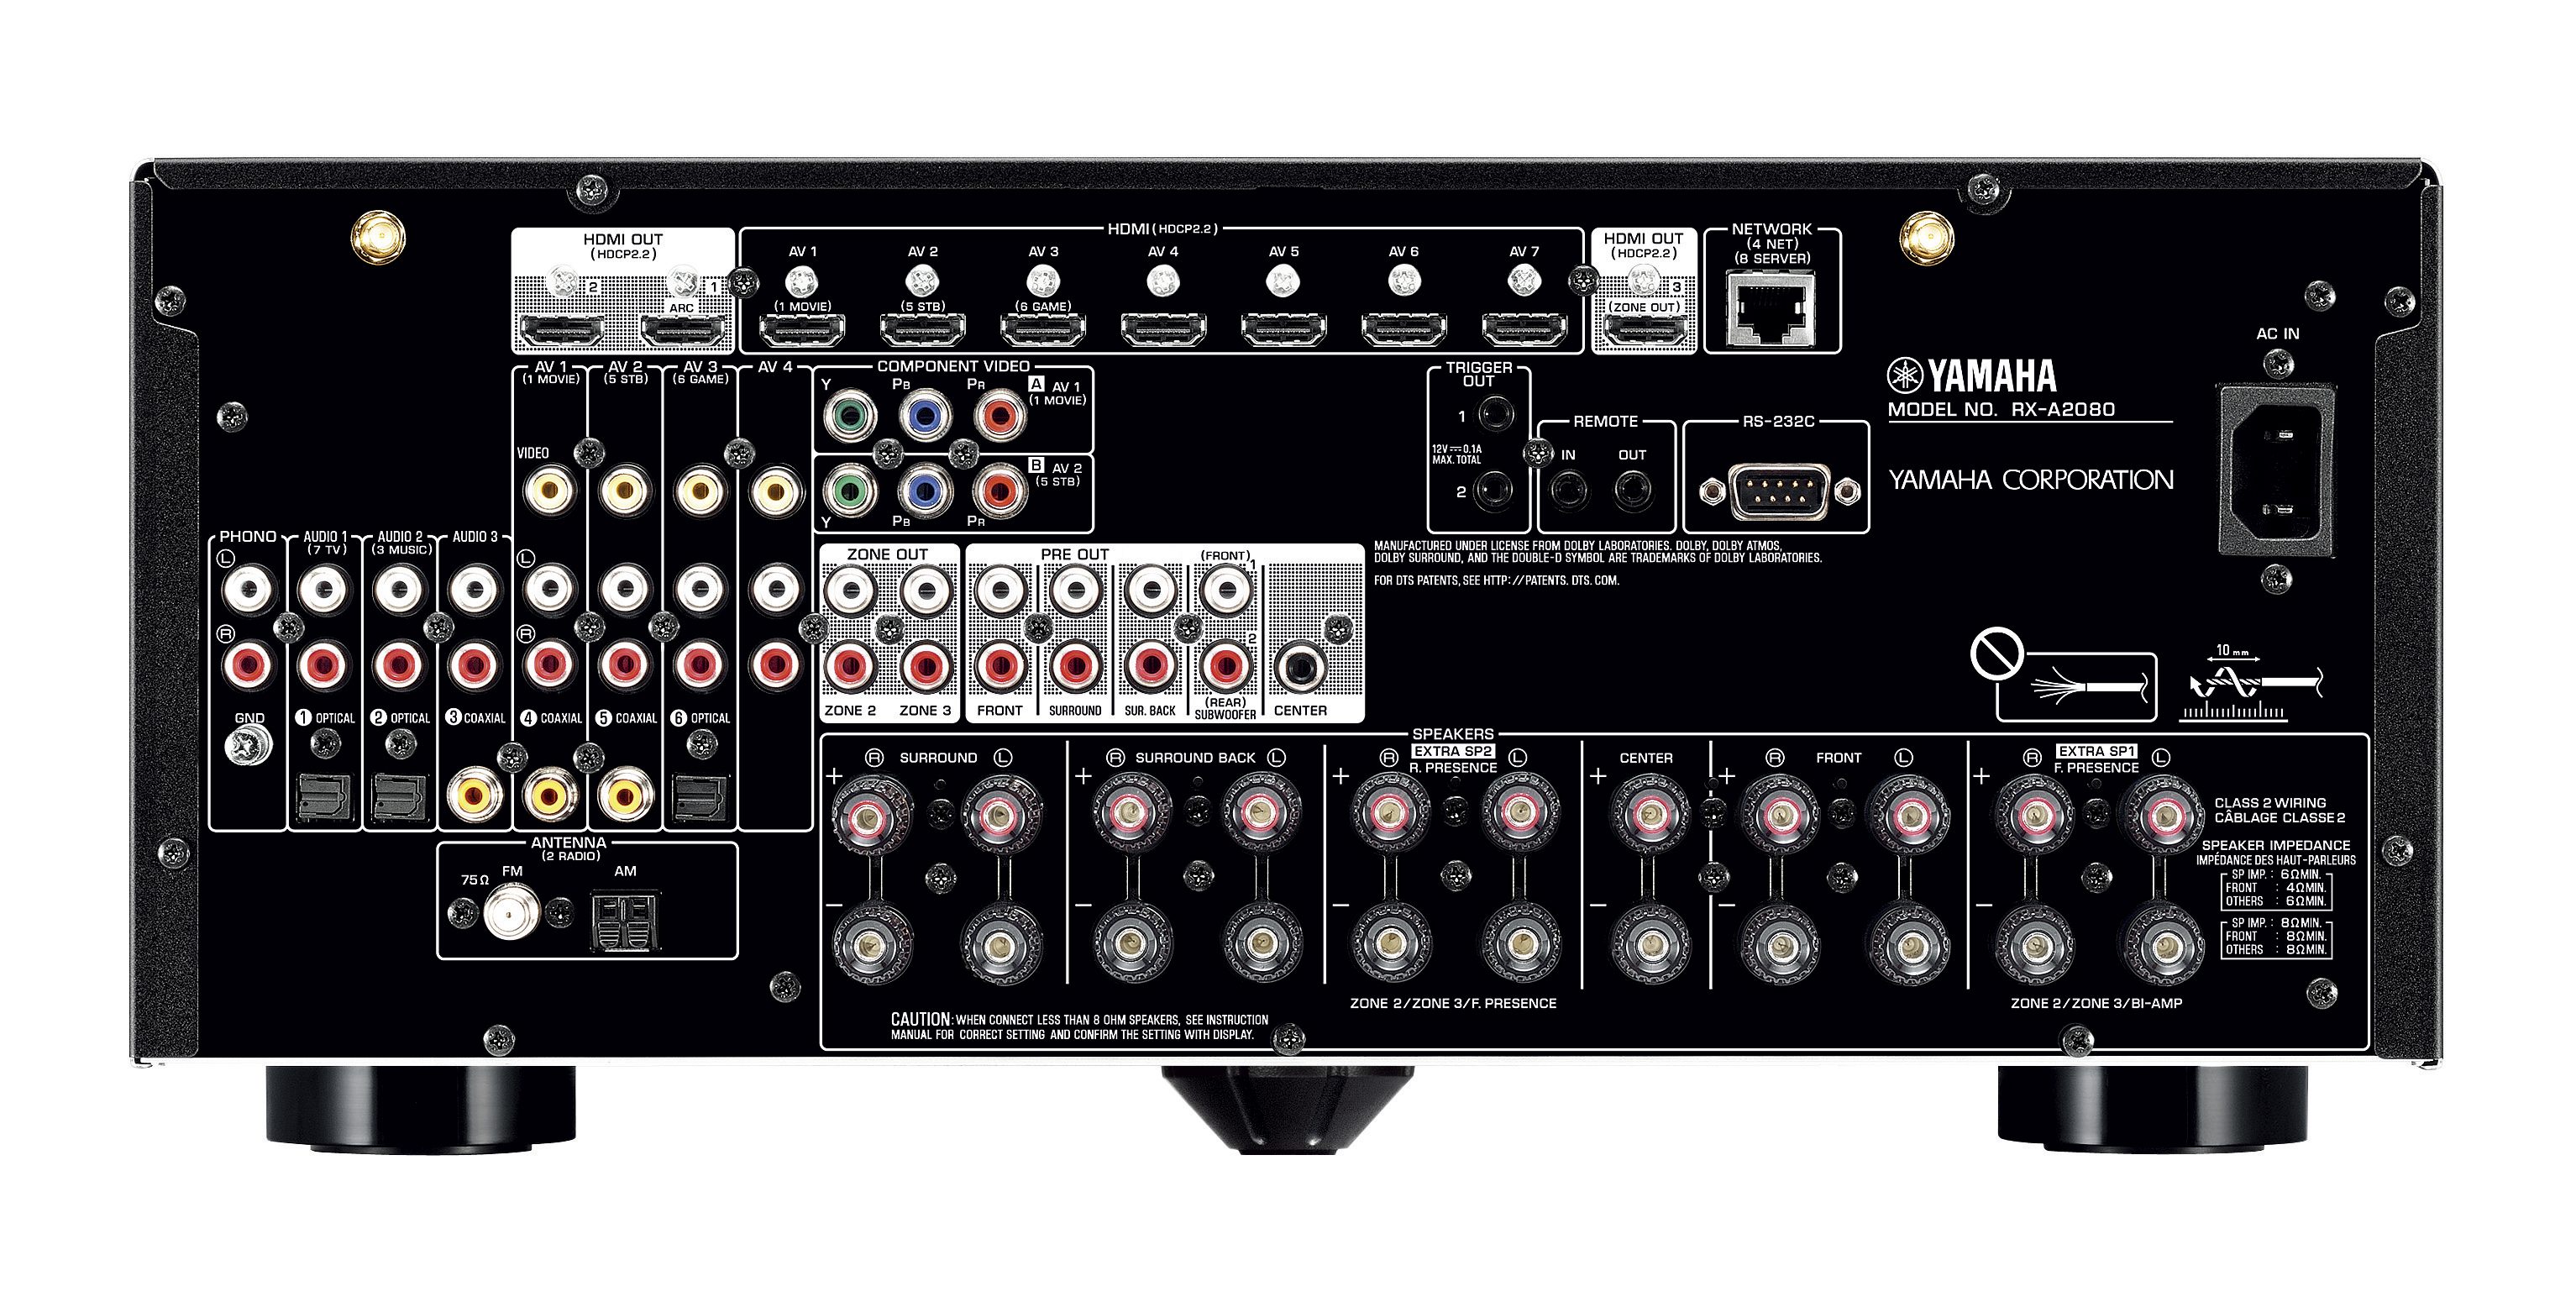 RX-A2080 - Overview - AV Receivers - Audio & Visual - Products 